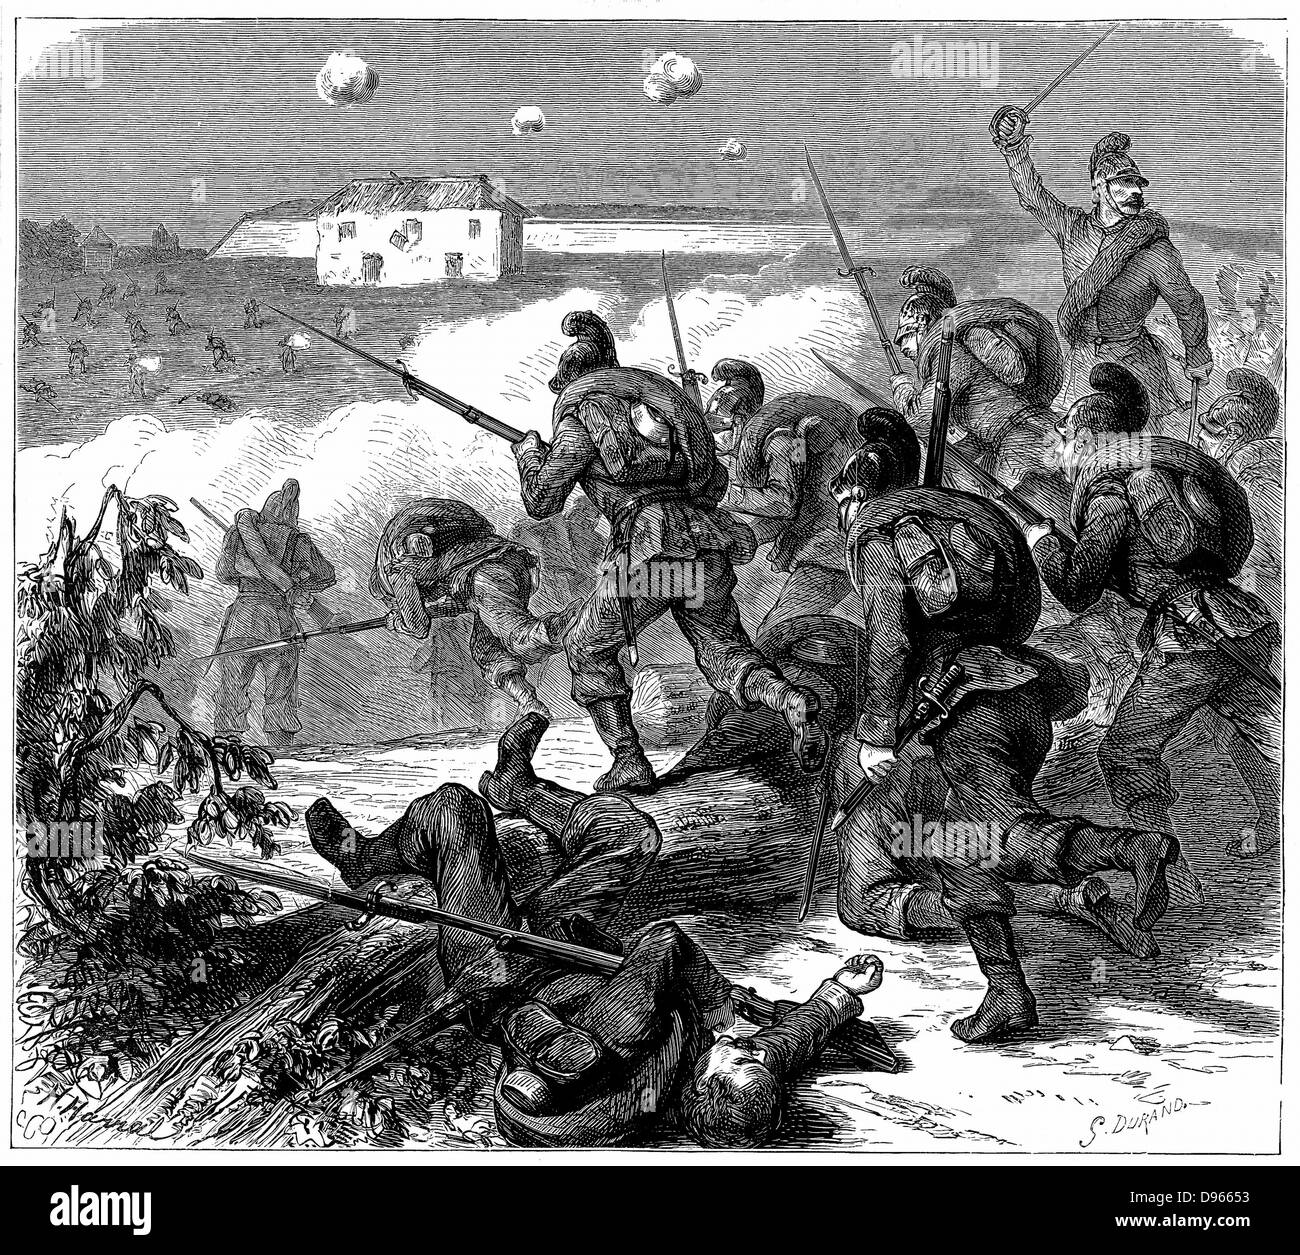 Franco-Prussian War 1870-1871. Bavarian troops of the Prussian army storming Bicetre.  Wood engraving, October 1870. Stock Photo